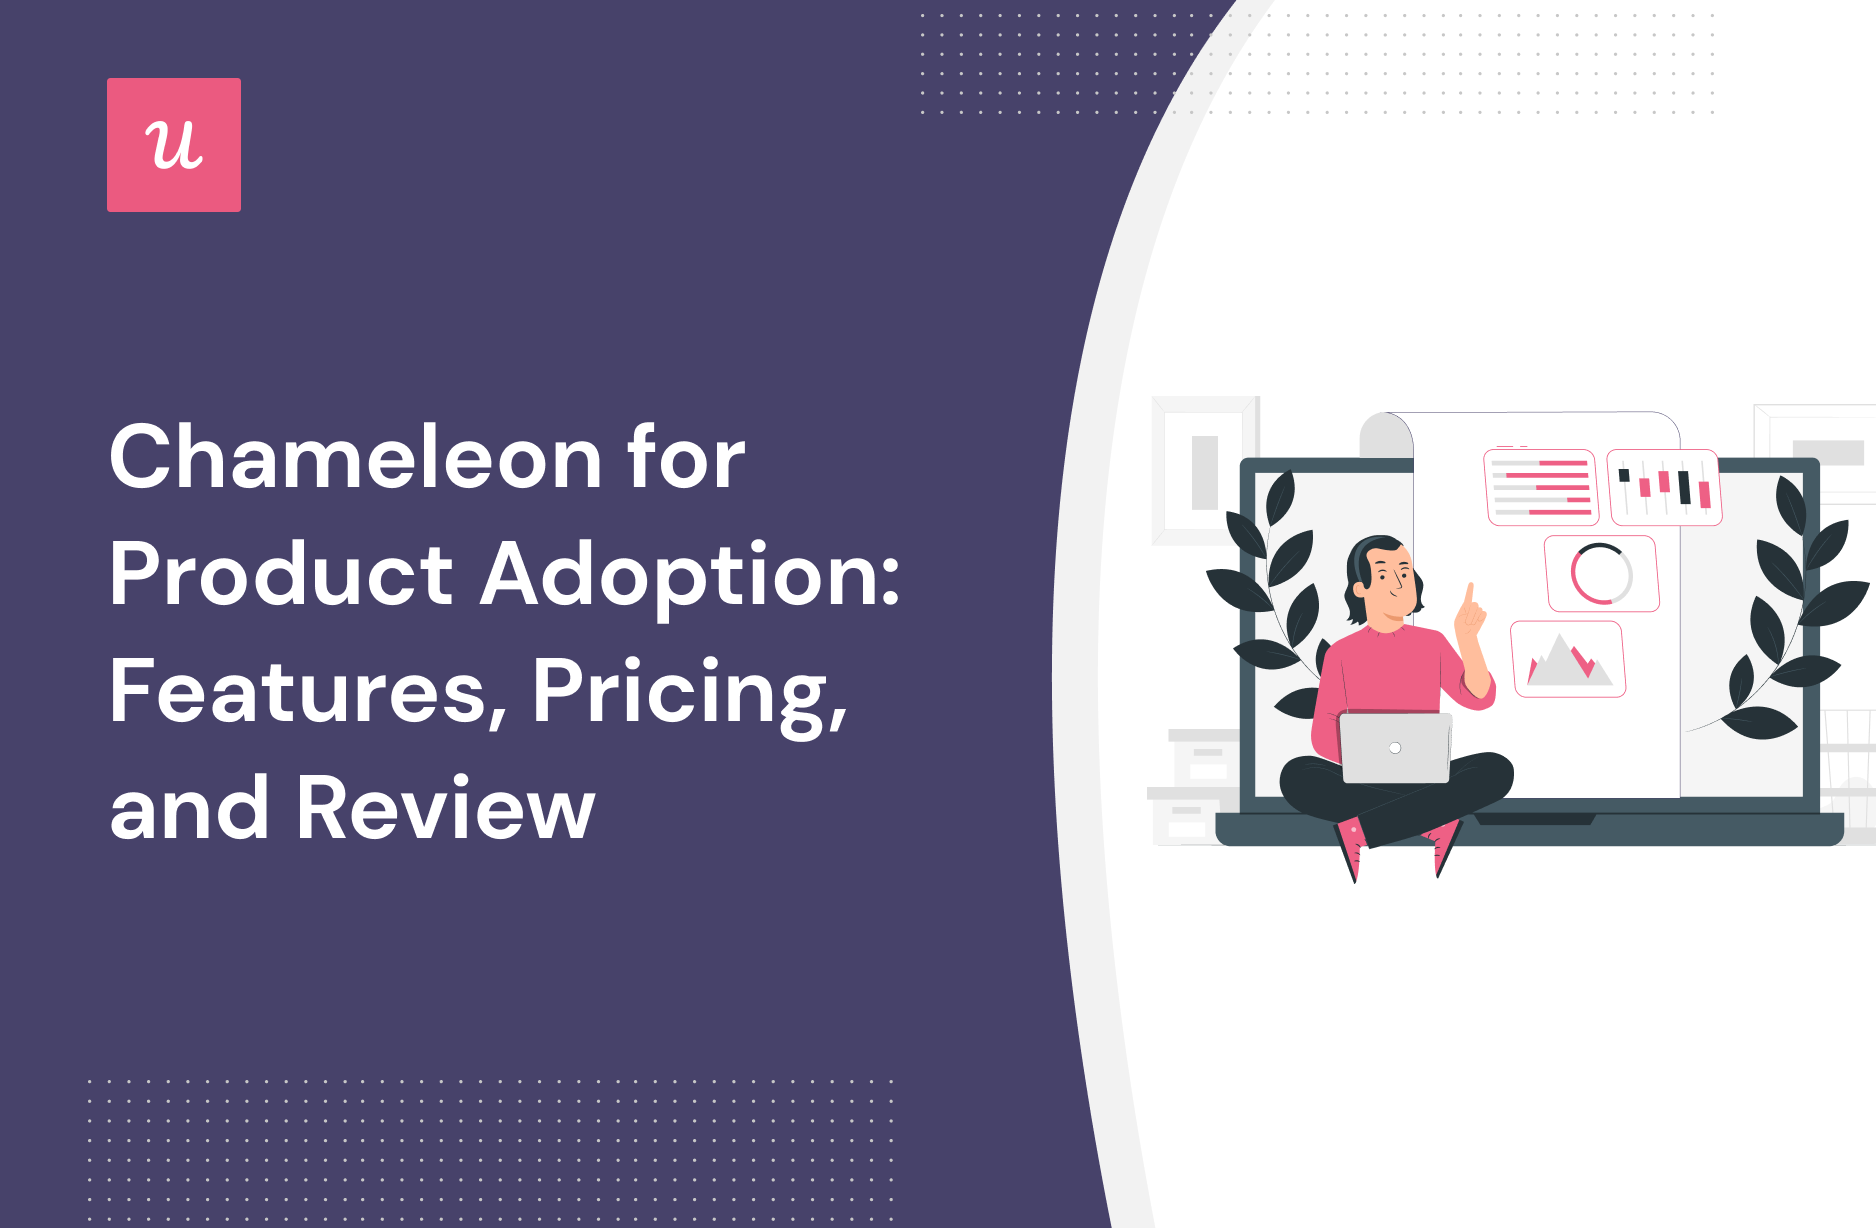 Chameleon for Product Adoption: Features, Pricing, and Review